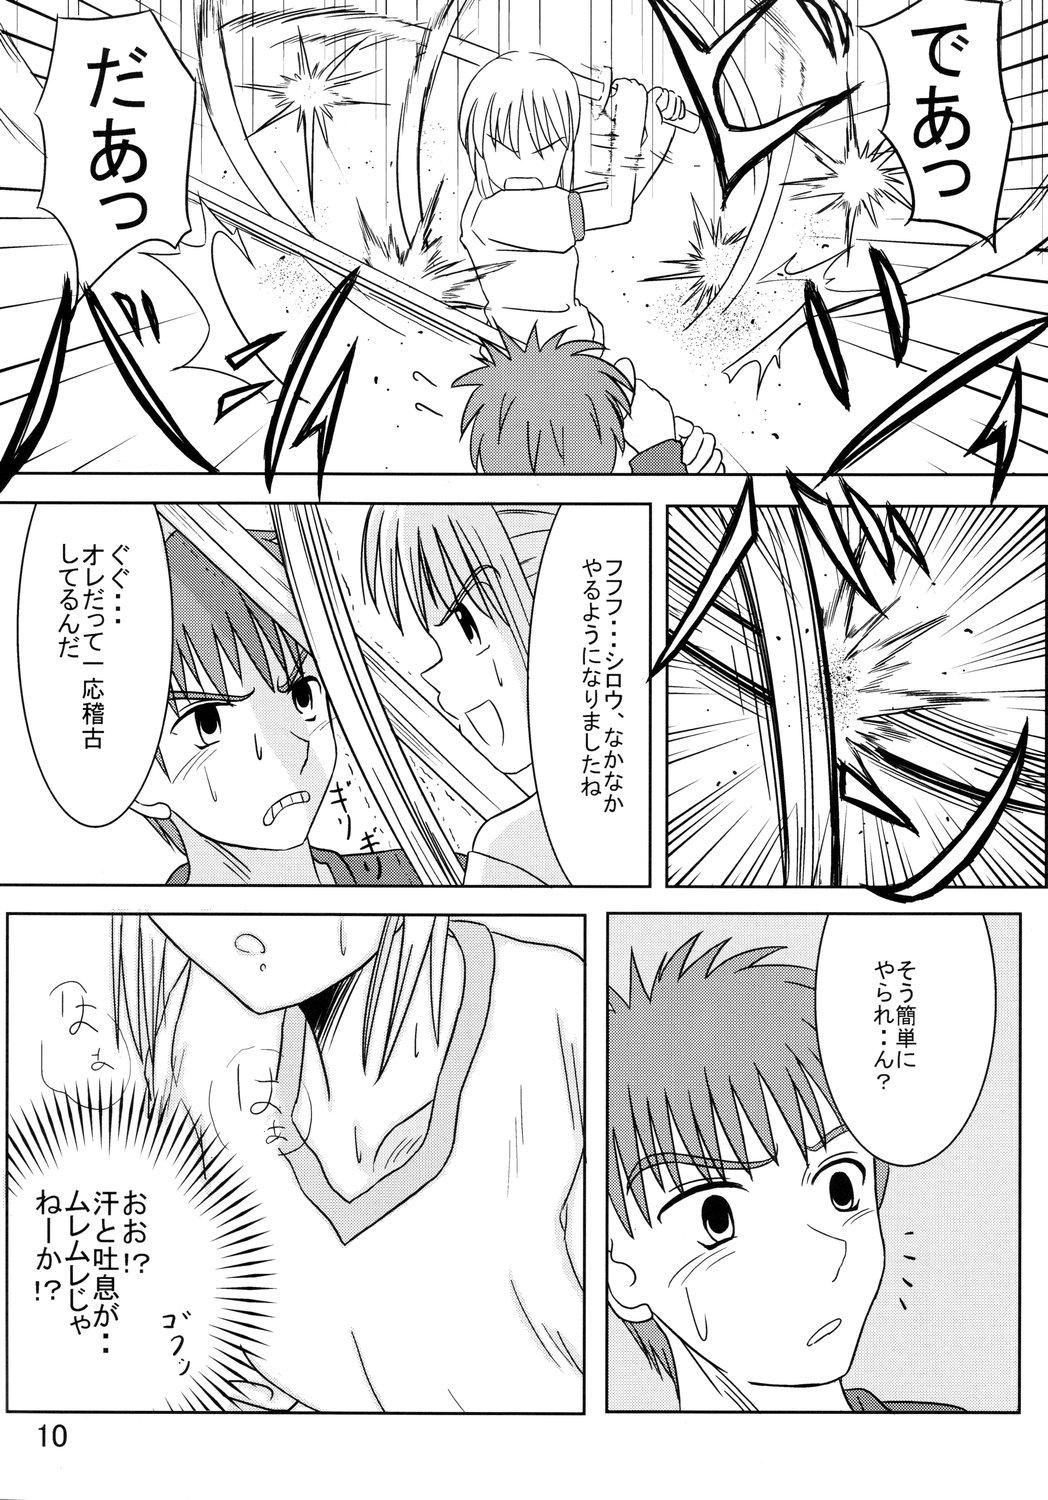 Tanga Saber Of Sanity - Fate stay night Shower - Page 9